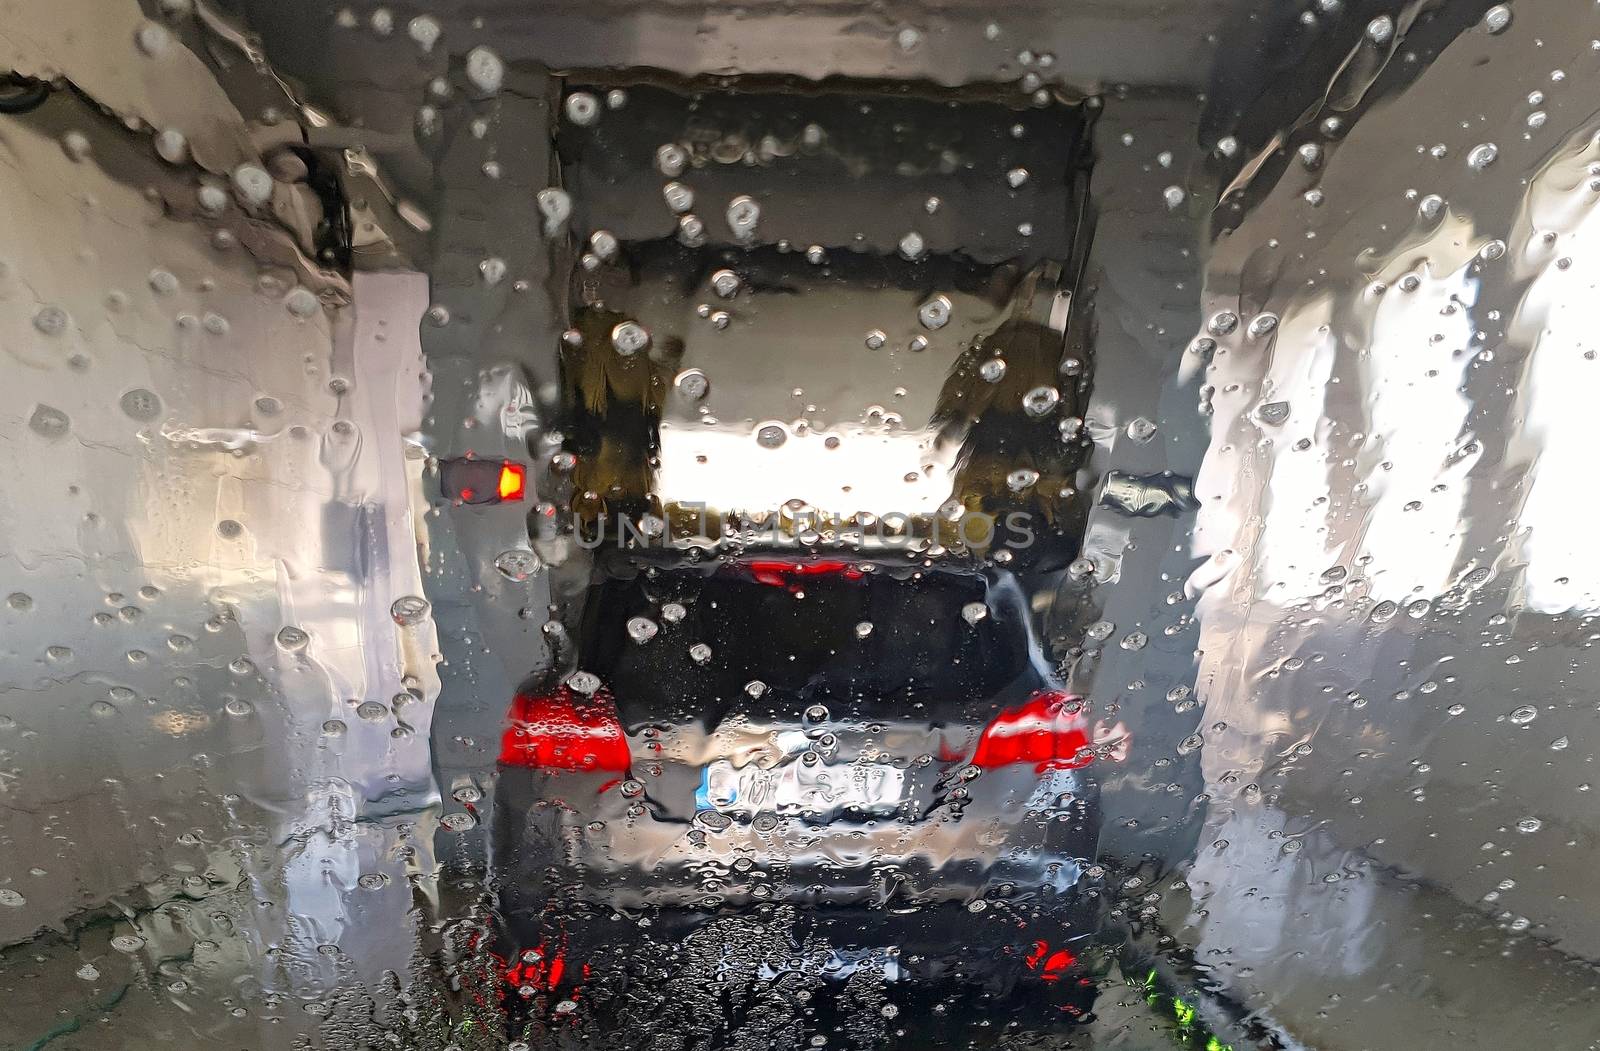 A view of a car in car wash by hamik